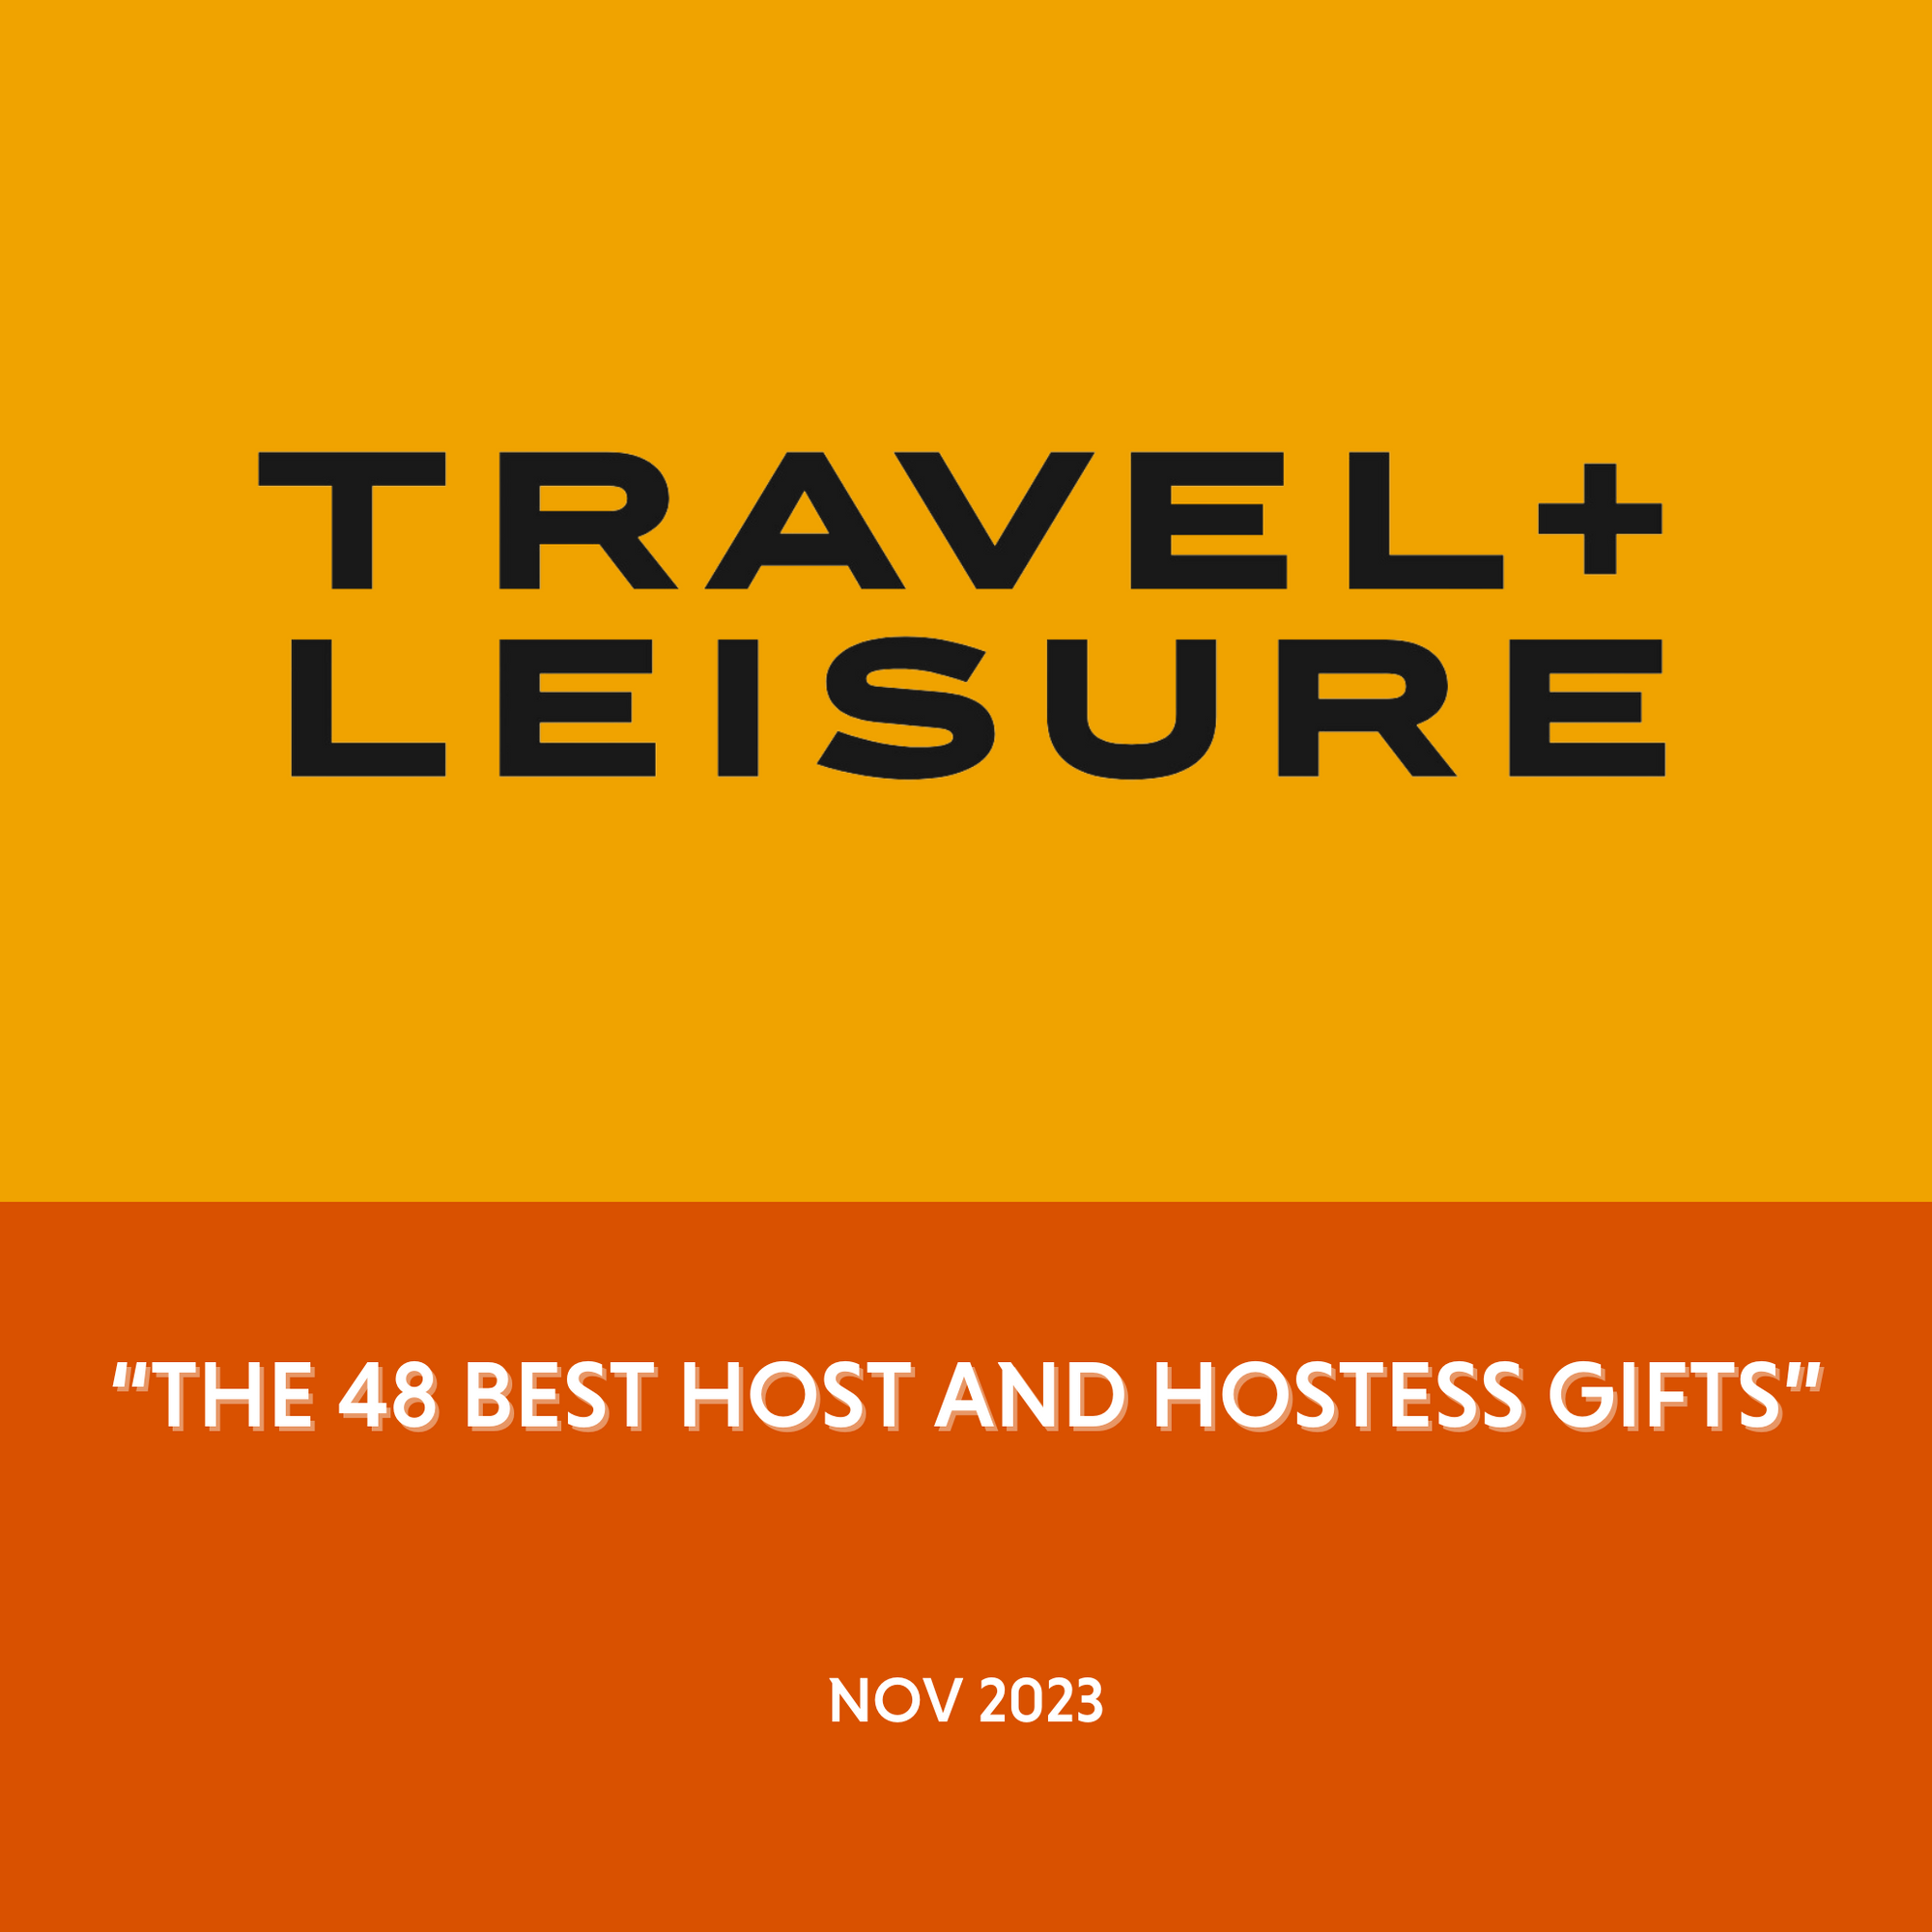 Travel + Leisure logo in black. Underneath reads "the 48 best host and hostess gifts, nov 2023"